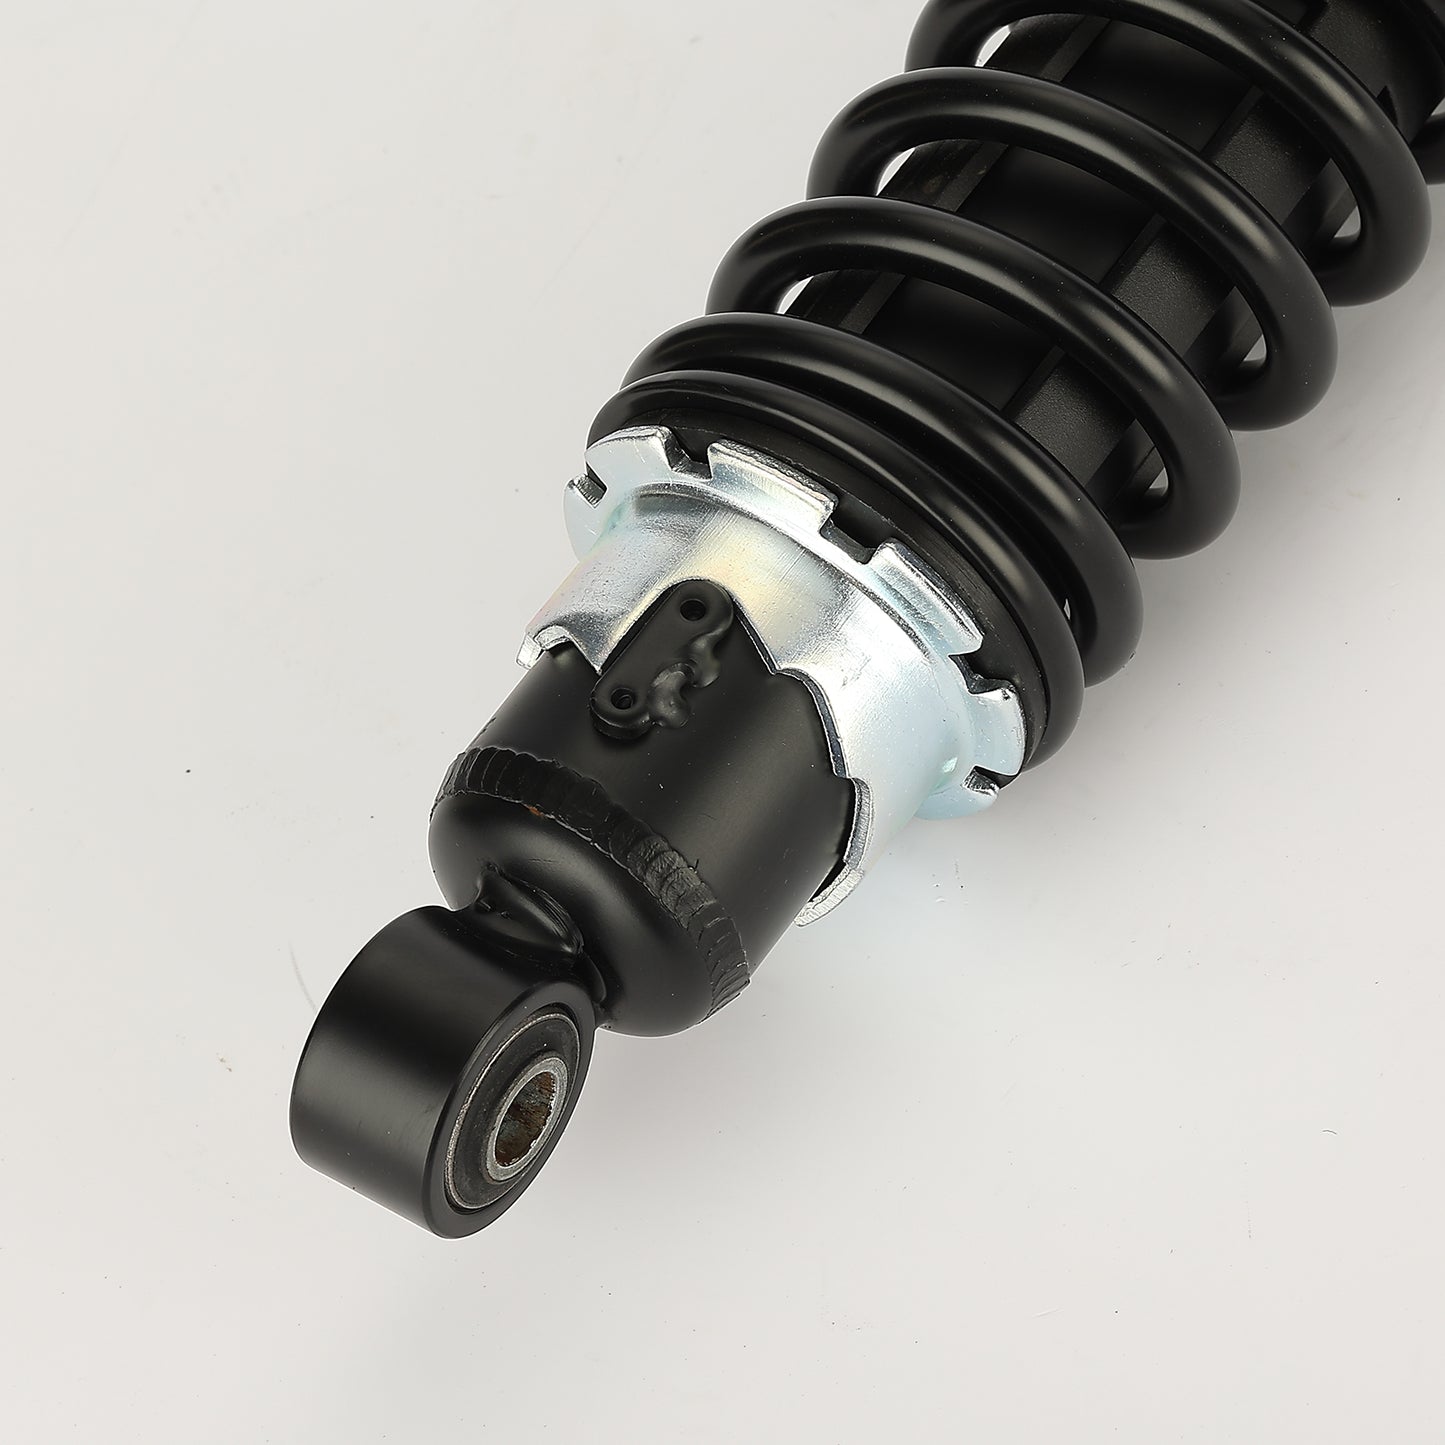 CAM-HO924 Caiman Shock Absorber ATV Front Left Right Shock Absorber Replacement for 1995-2003 Honda Fourtrax Foreman 400 TRX400FW Foreman 400 TRX 400FW Front Shock